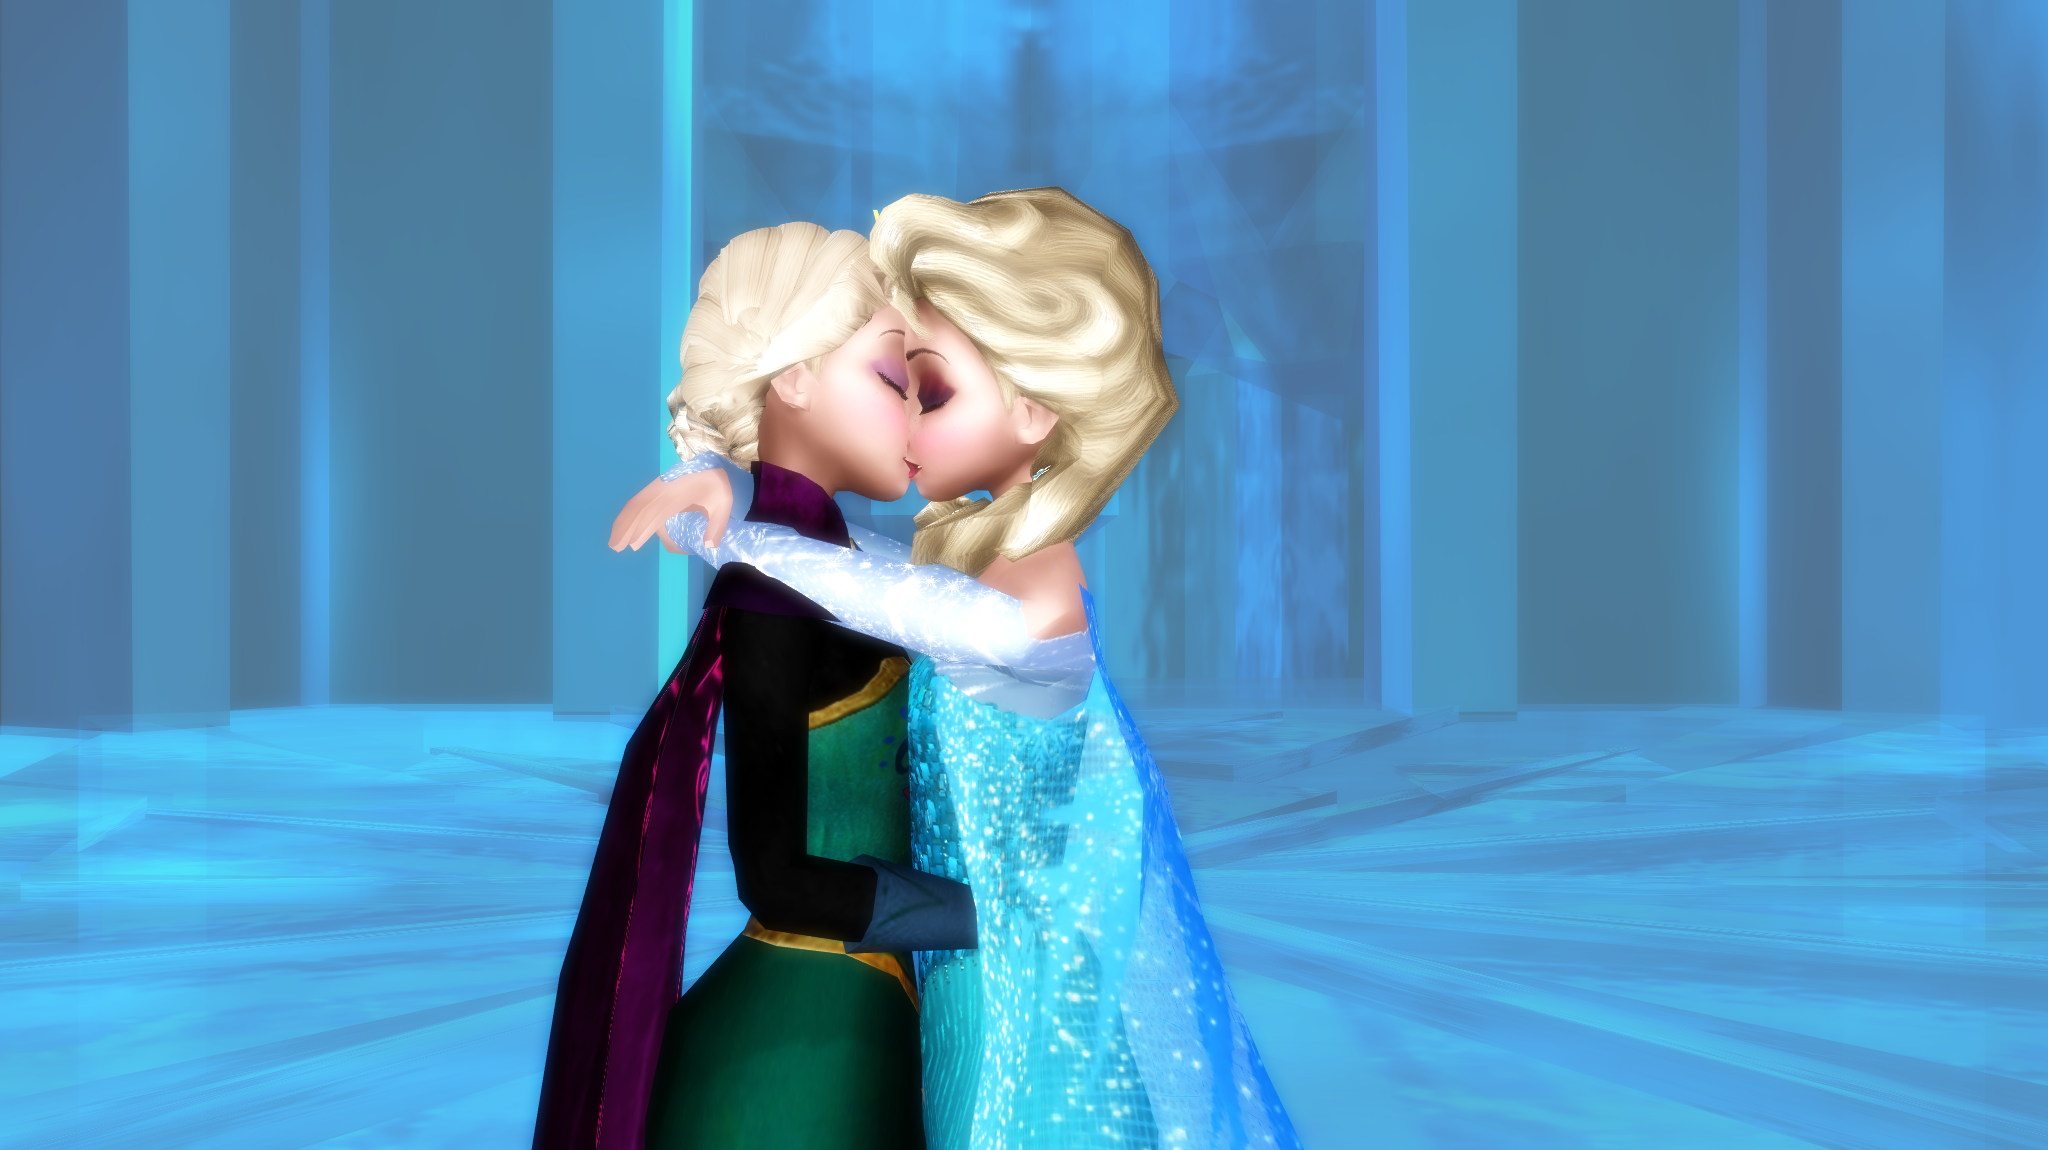 Elsacest - kiss in the ice castle by Master-5 on DeviantArt